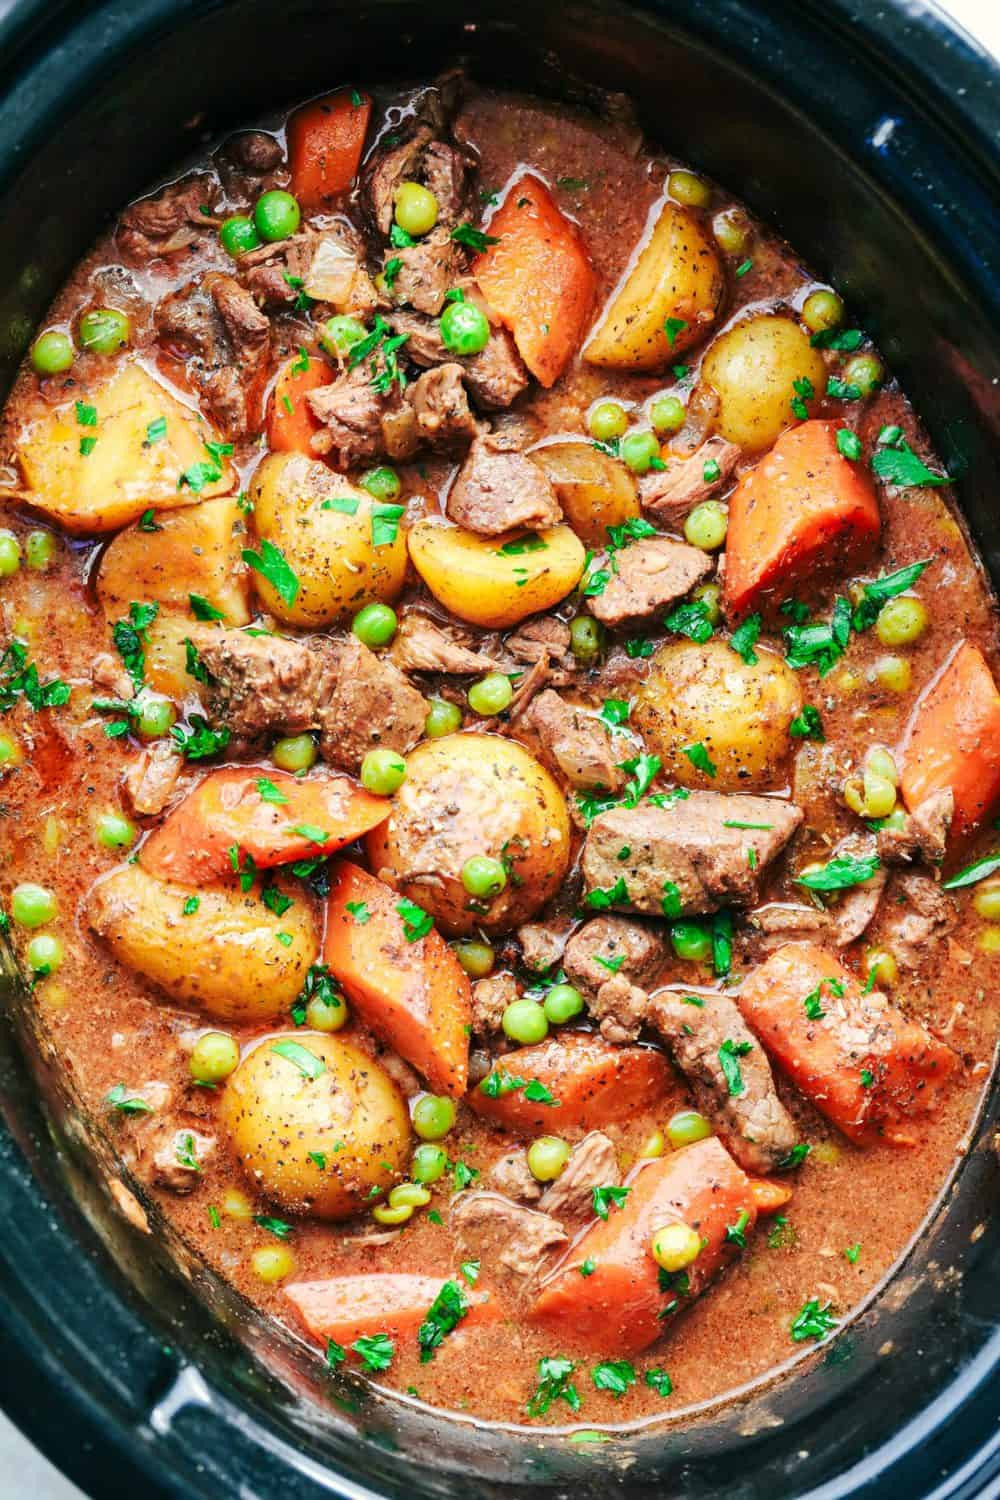 Top 24 Slow Cooker Lamb Stew Recipes - Home, Family, Style and Art Ideas